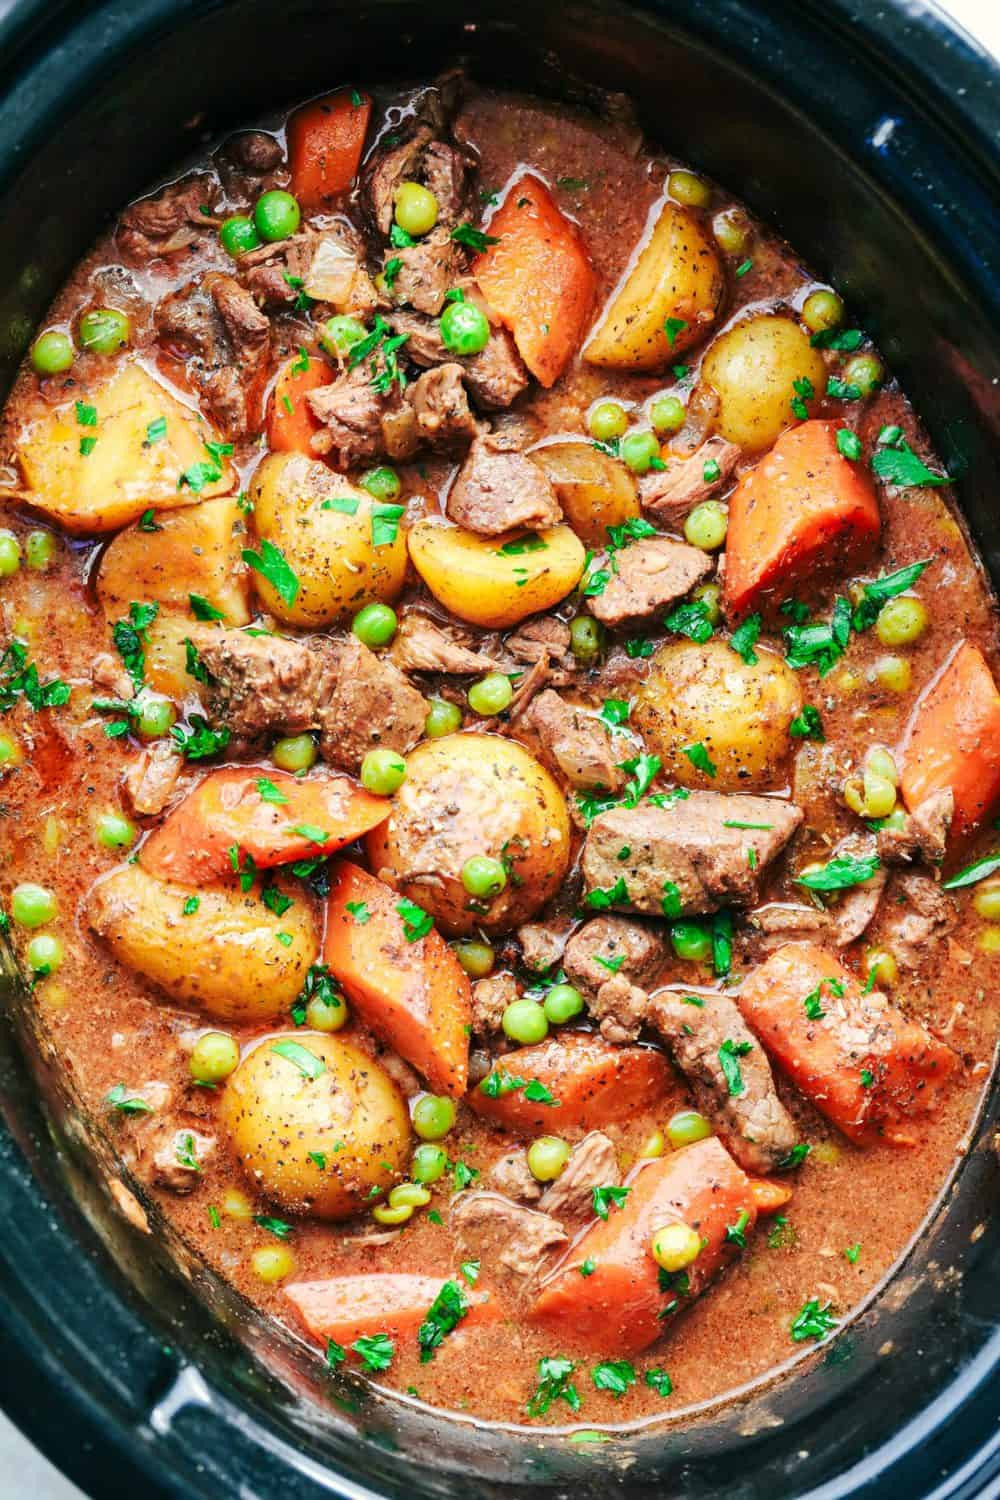 Top 24 Slow Cooker Lamb Stew Recipes - Home, Family, Style and Art Ideas